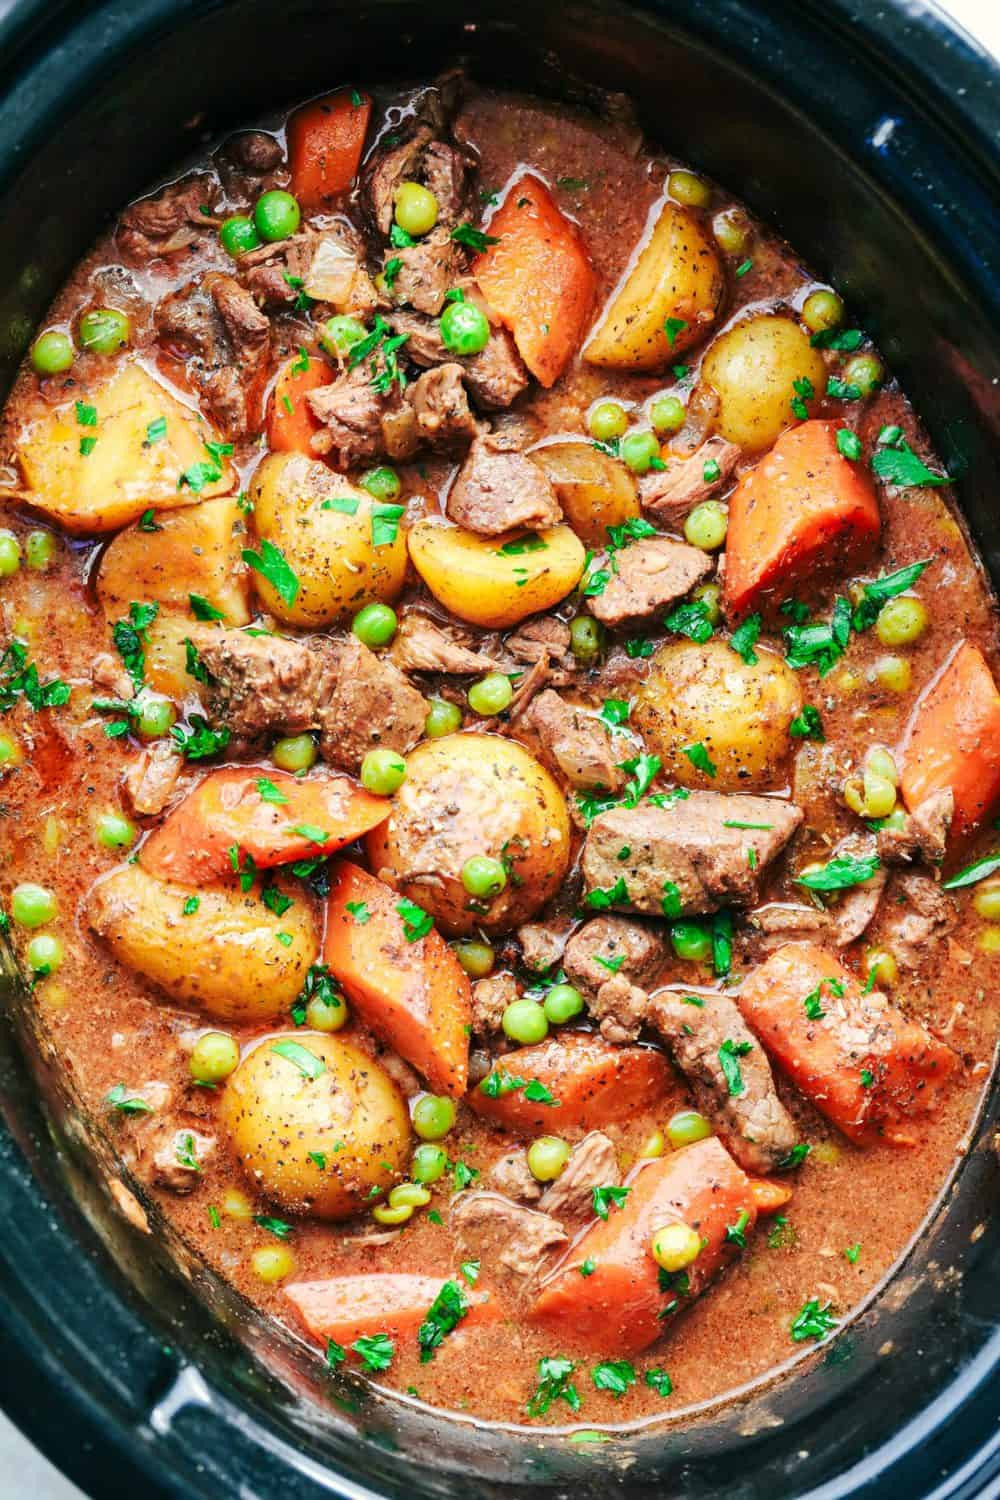 Top 24 Slow Cooker Lamb Stew Recipes - Home, Family, Style and Art Ideas